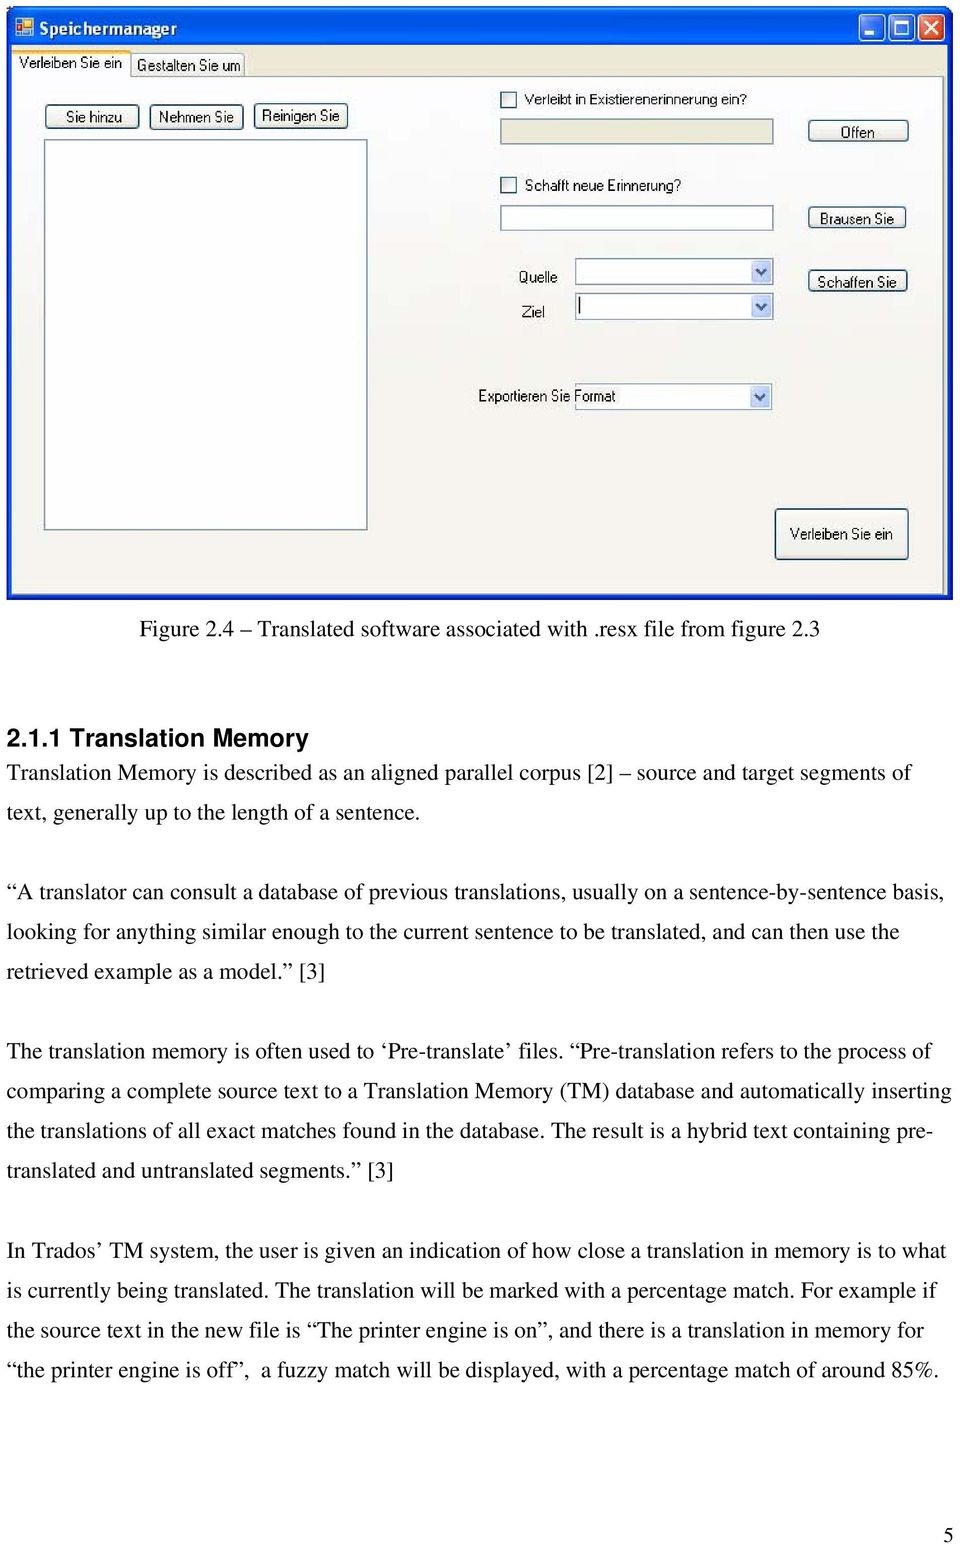 A translator can consult a database of previous translations, usually on a sentence-by-sentence basis, looking for anything similar enough to the current sentence to be translated, and can then use